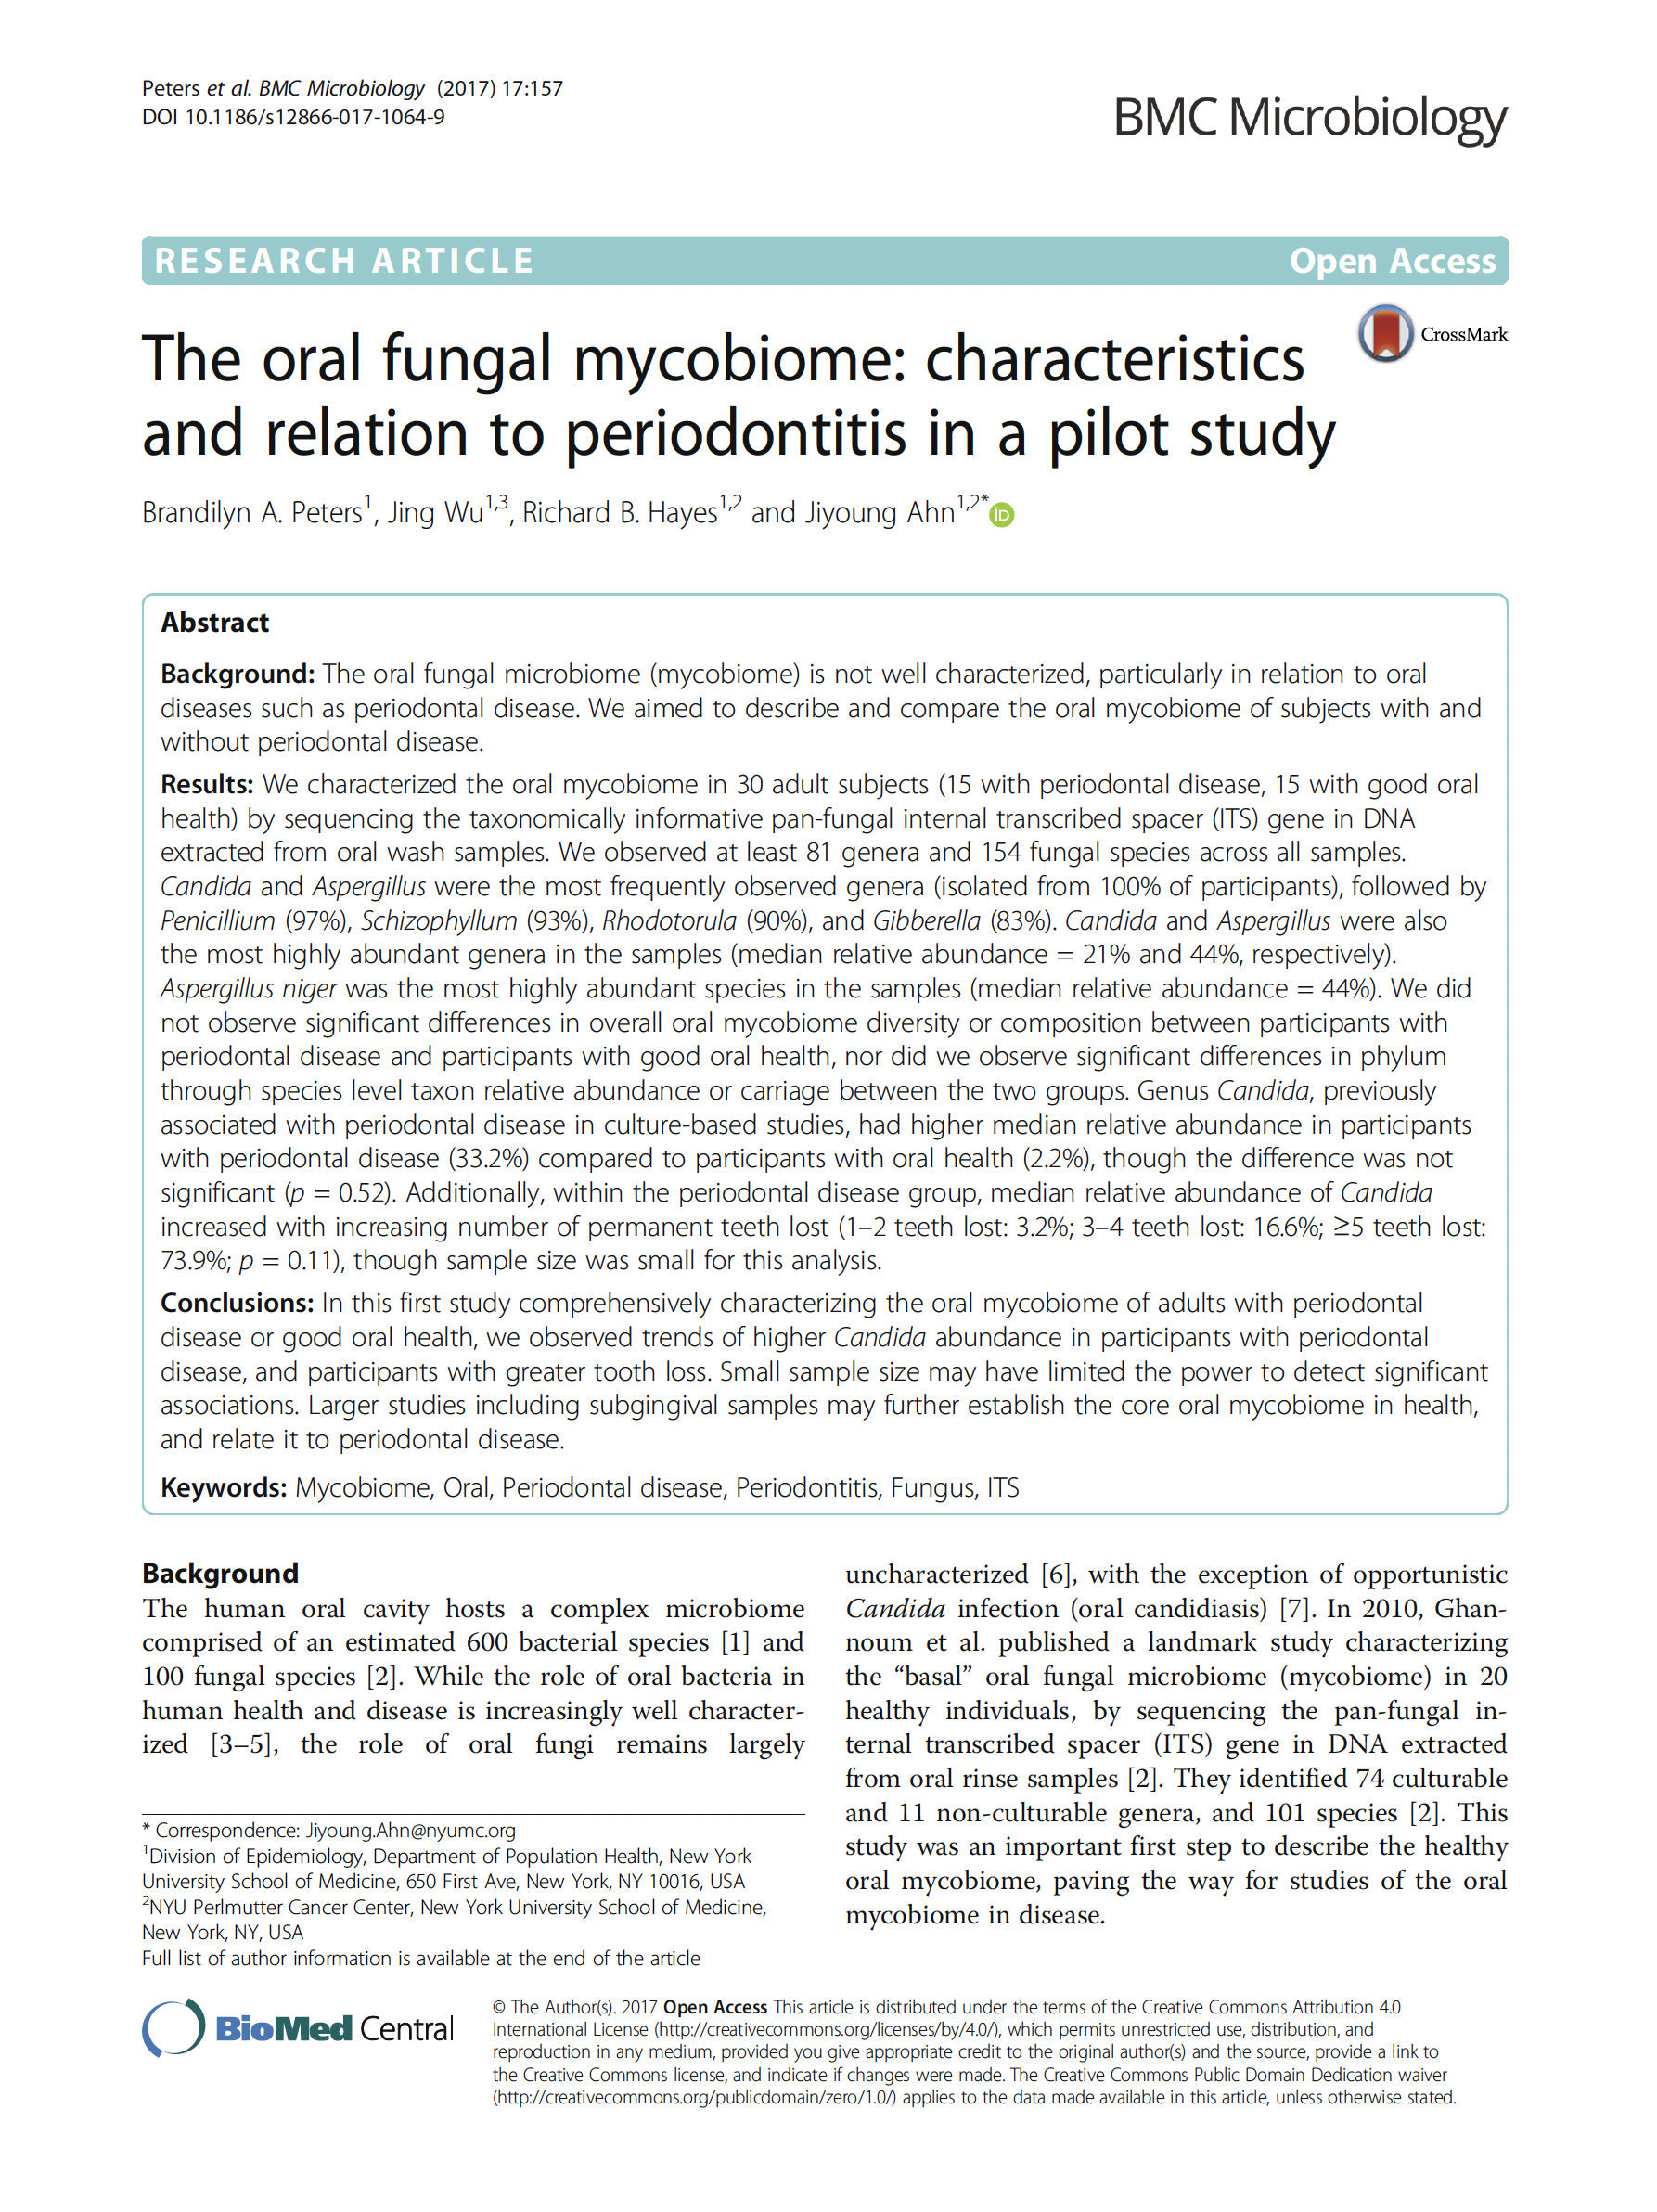 The oral fungal mycobiome-characteristics and relation to perio disease